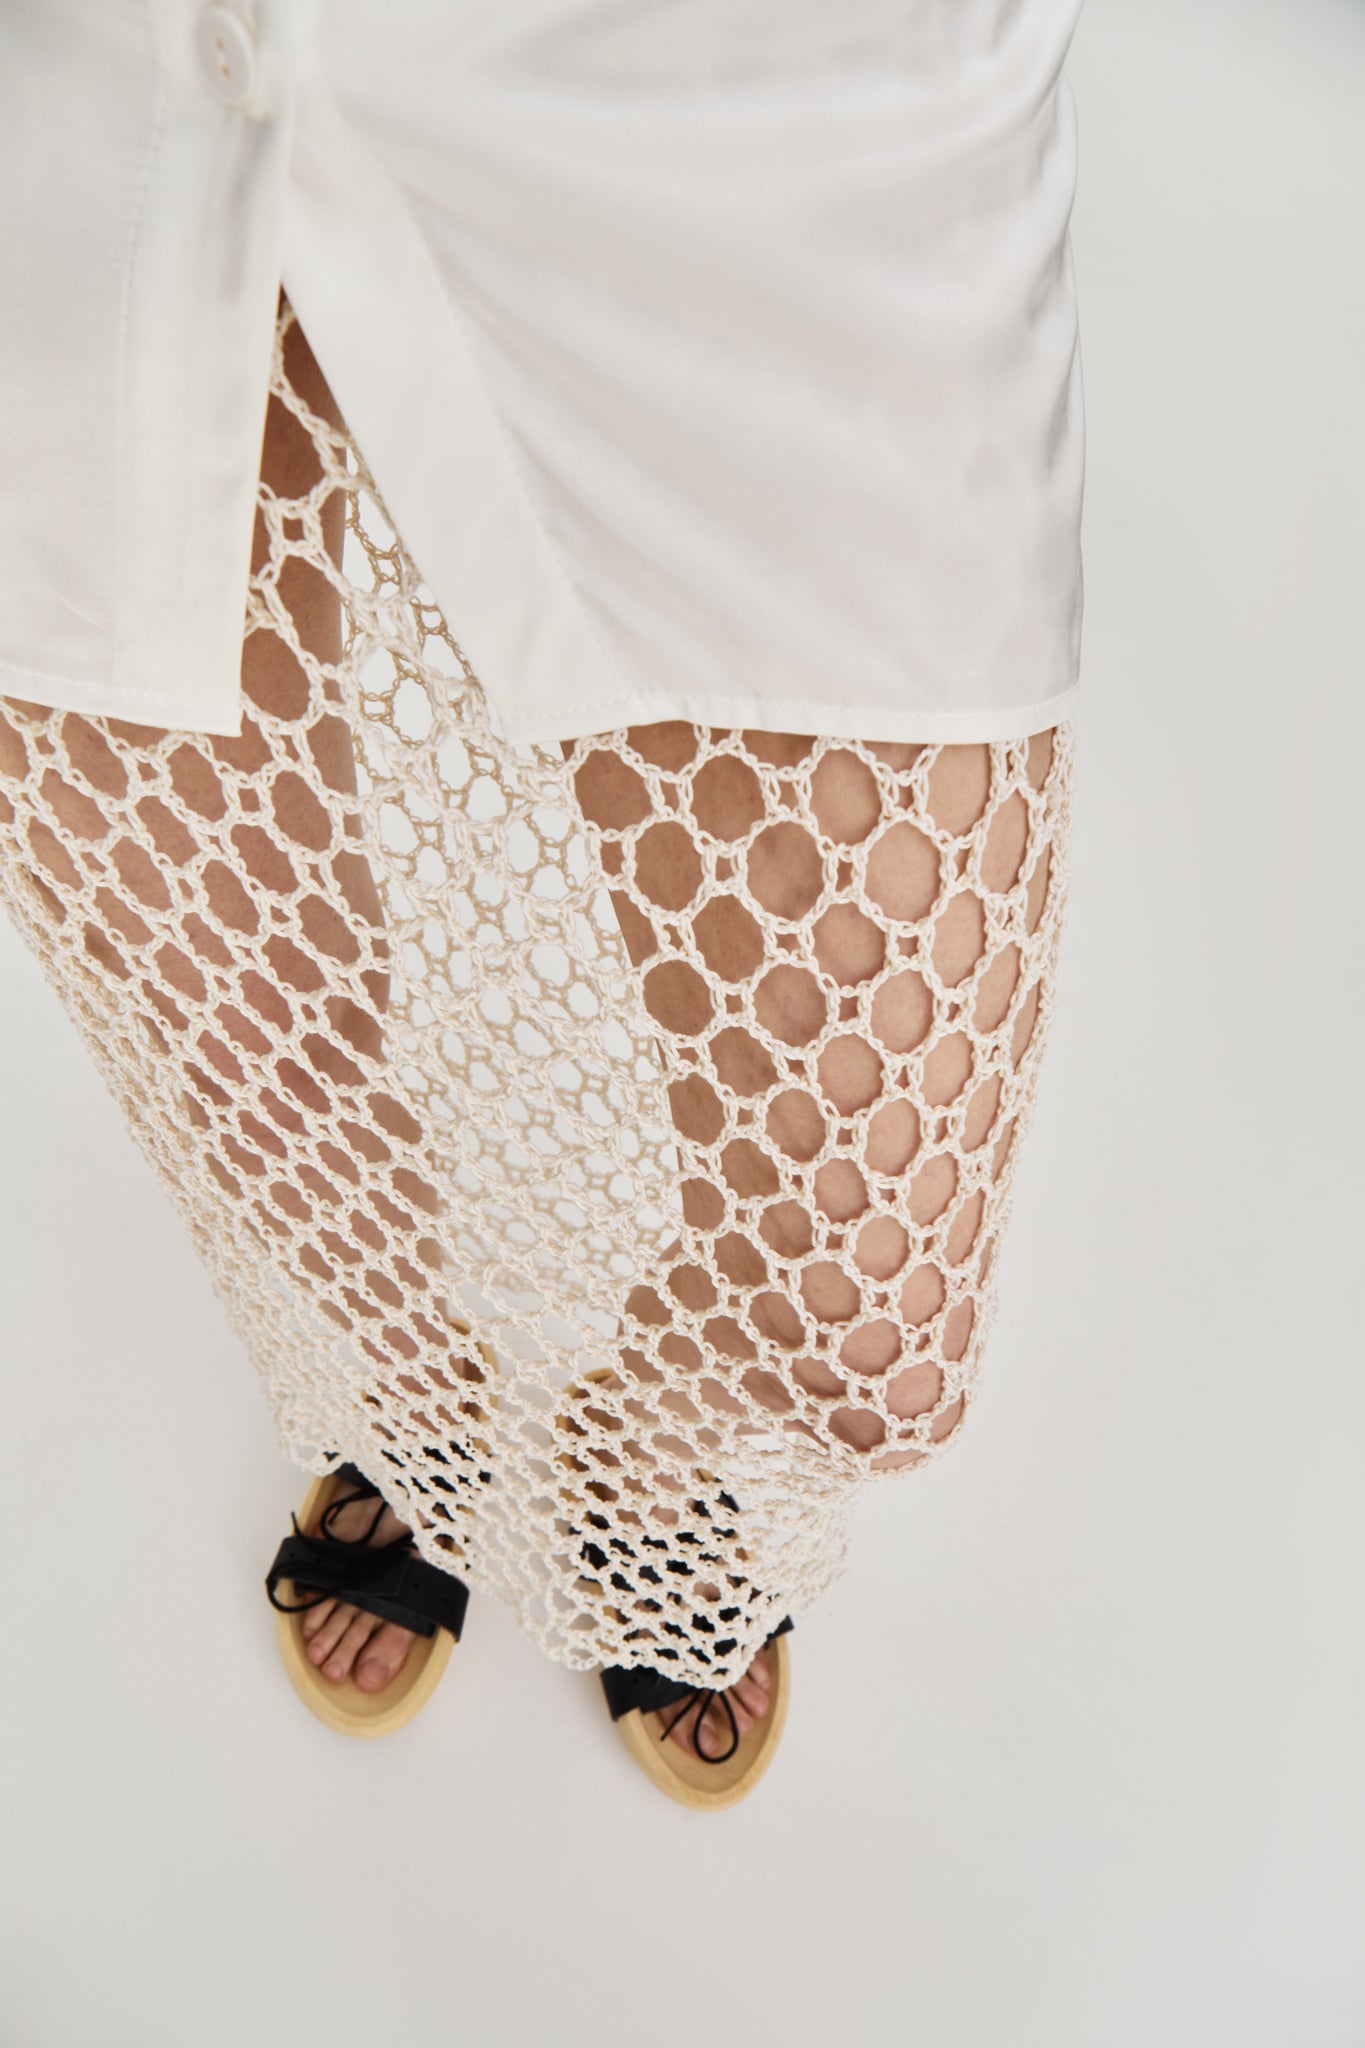 Crochet midi skirt in milky color from clothing brand FORMA